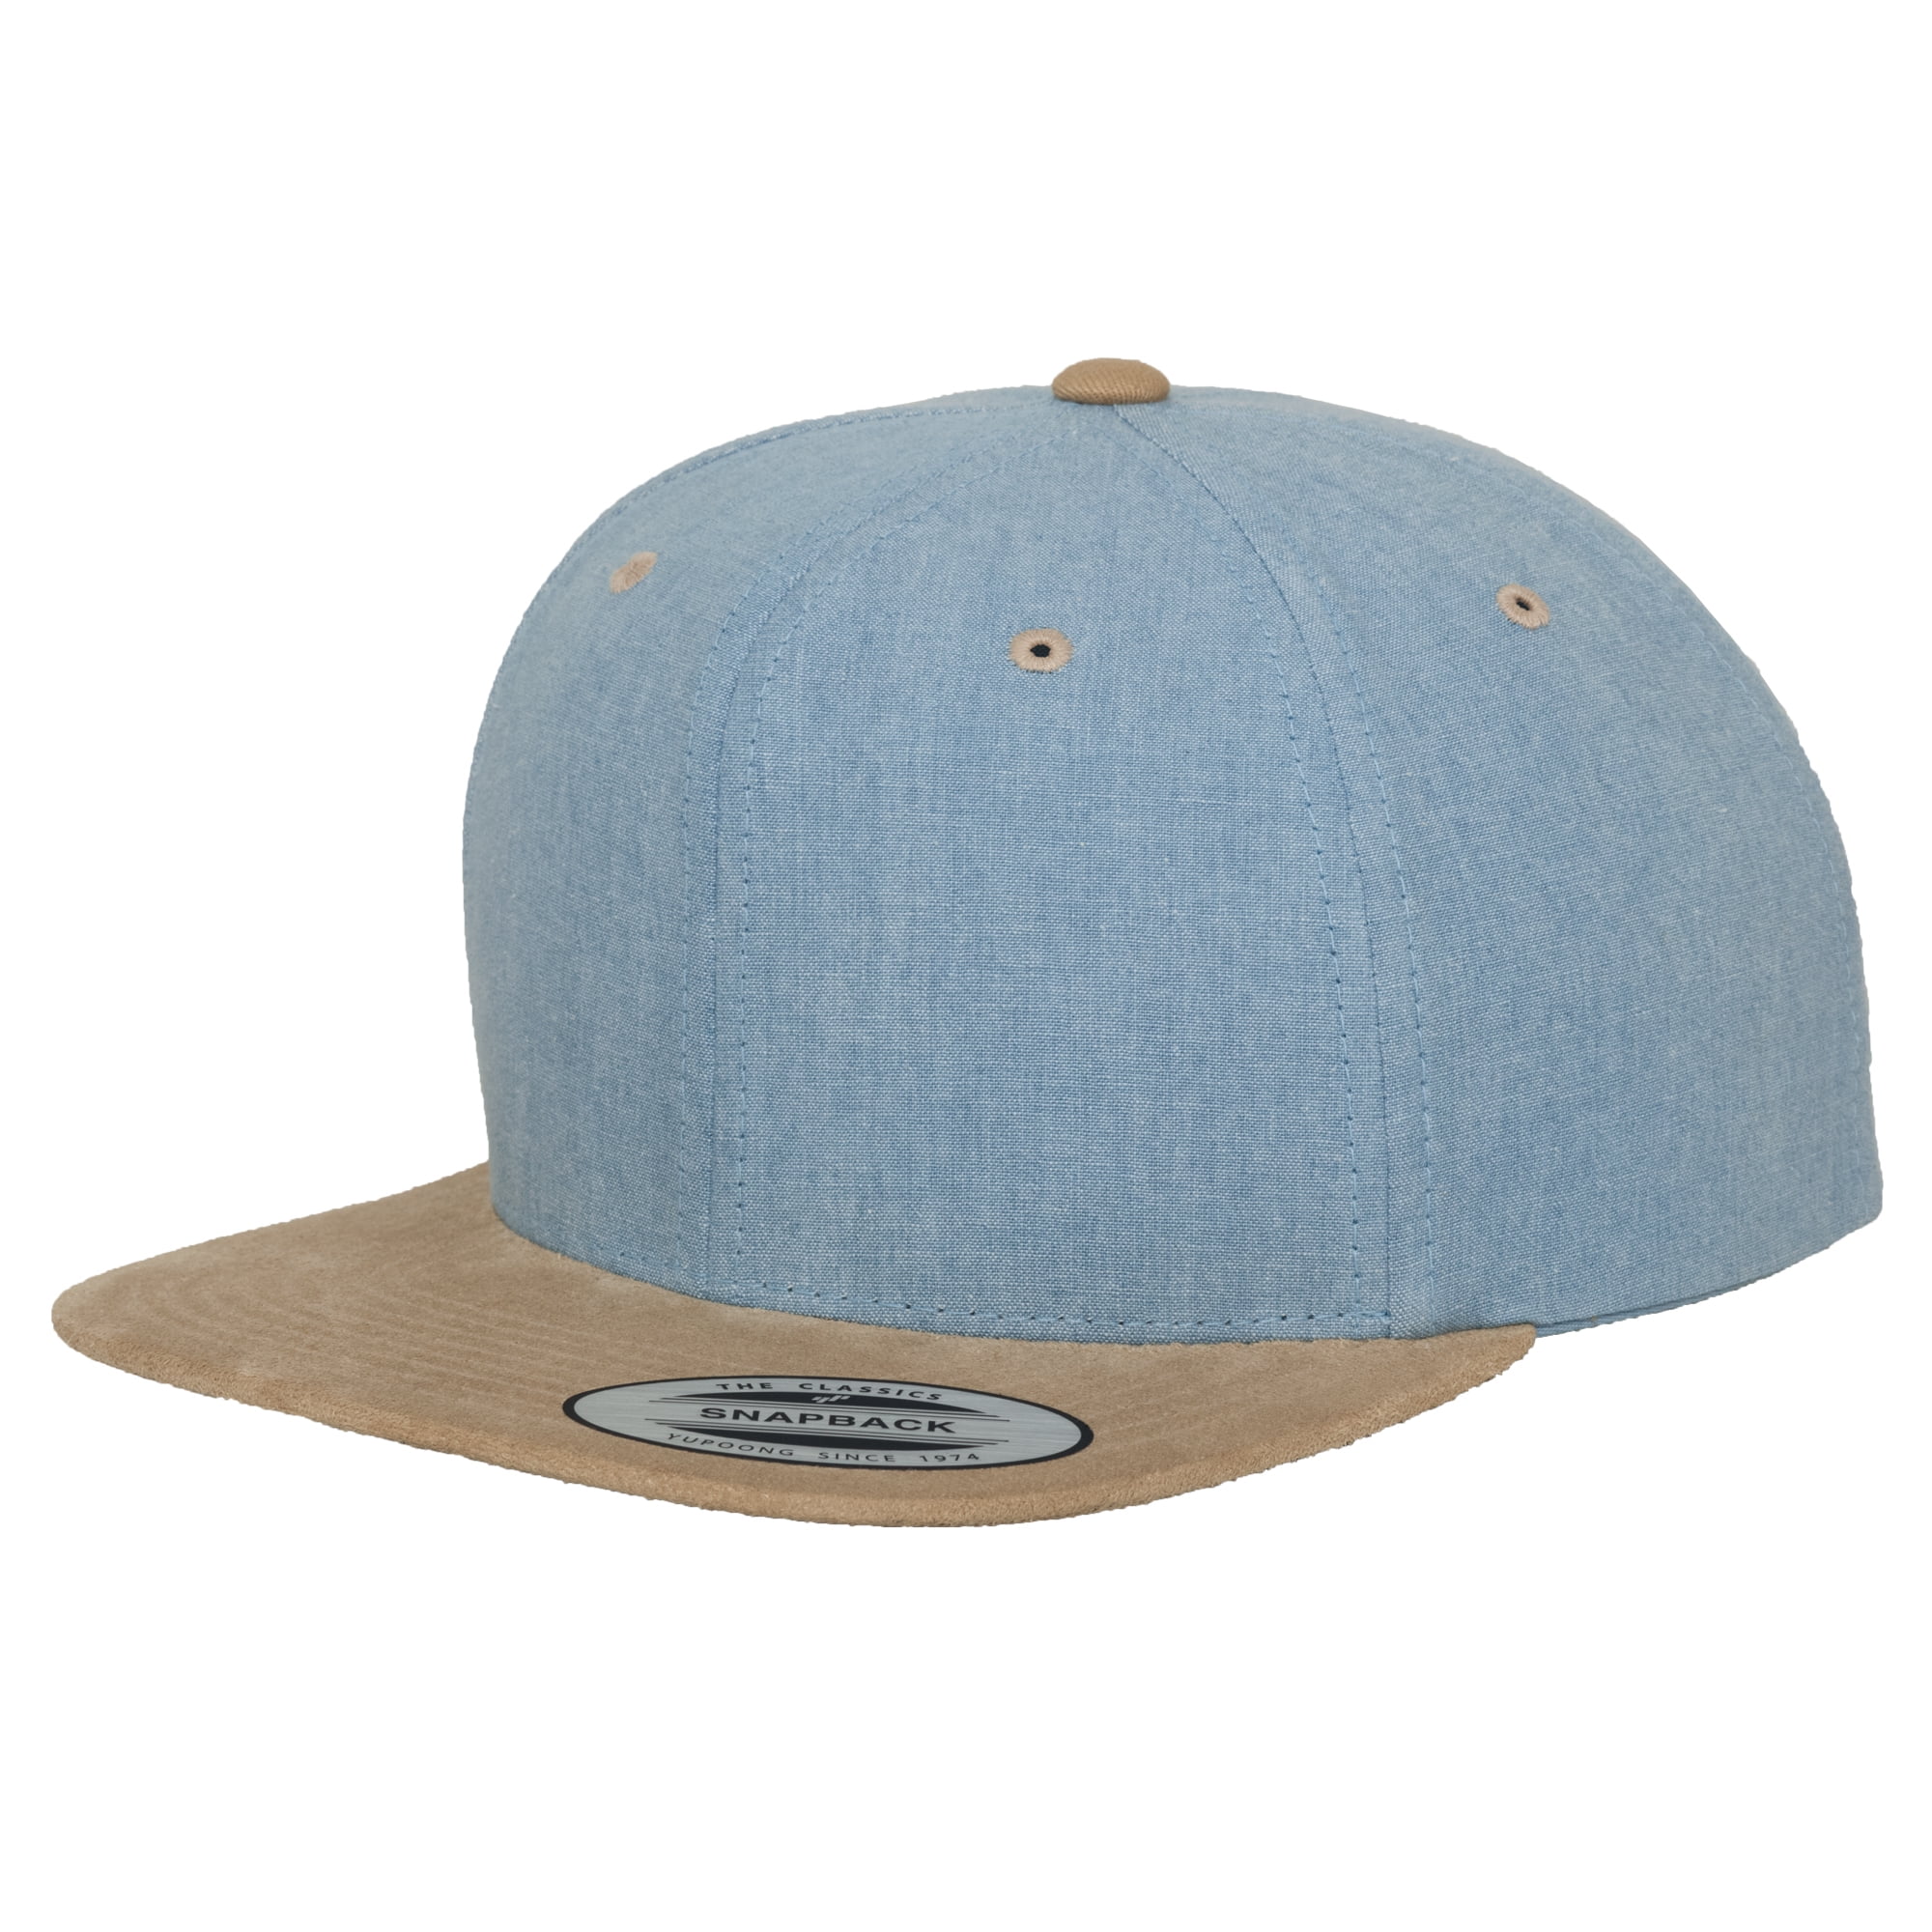 Yupoong Flexfit Snapback Chambray-Suede Cap